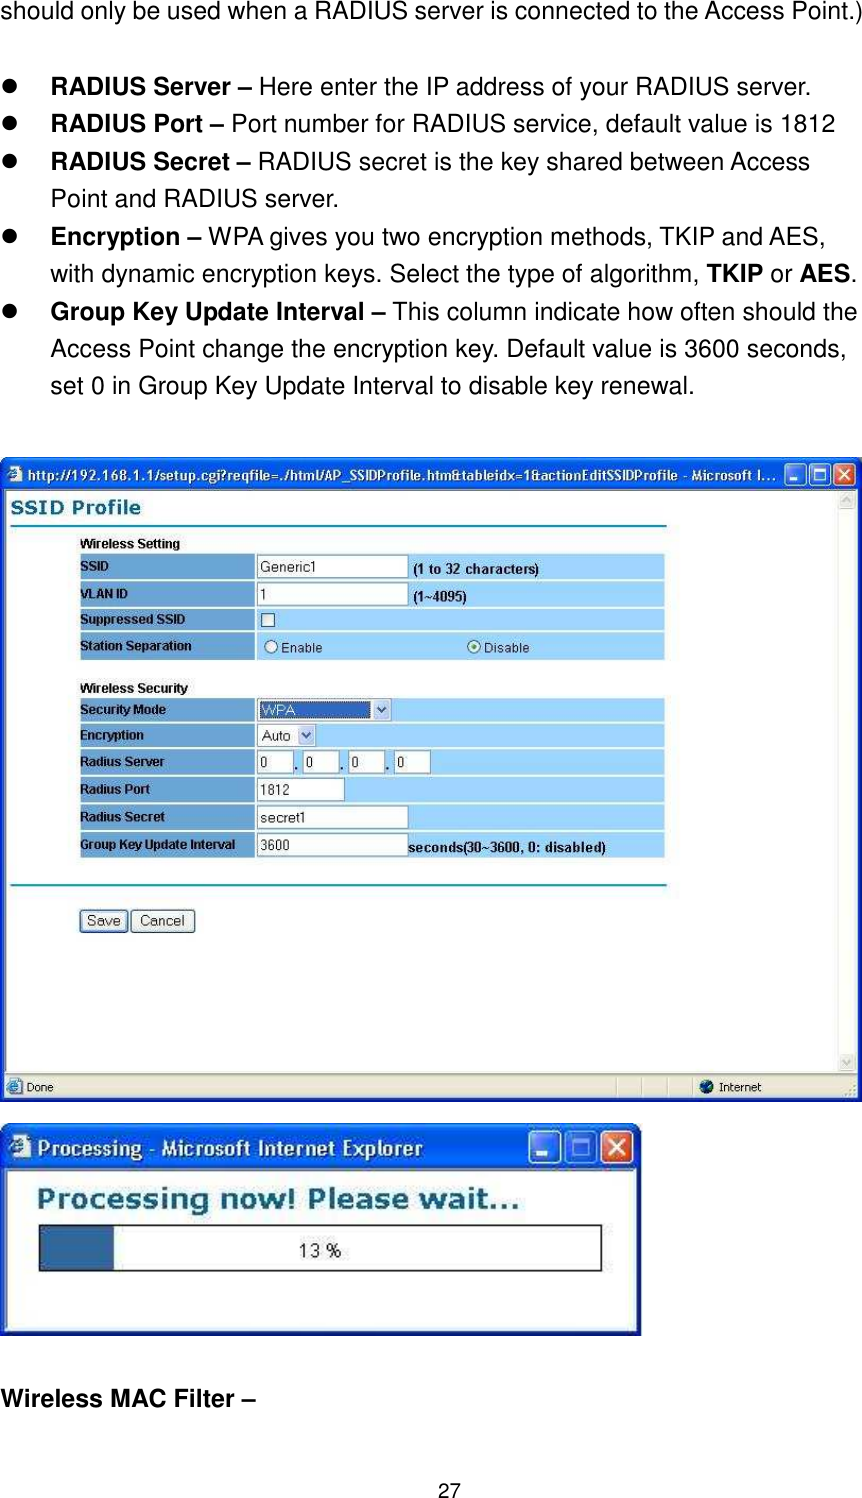  27 should only be used when a RADIUS server is connected to the Access Point.)     RADIUS Server – Here enter the IP address of your RADIUS server.    RADIUS Port – Port number for RADIUS service, default value is 1812  RADIUS Secret – RADIUS secret is the key shared between Access Point and RADIUS server.  Encryption – WPA gives you two encryption methods, TKIP and AES, with dynamic encryption keys. Select the type of algorithm, TKIP or AES.  Group Key Update Interval – This column indicate how often should the Access Point change the encryption key. Default value is 3600 seconds, set 0 in Group Key Update Interval to disable key renewal.     Wireless MAC Filter –  